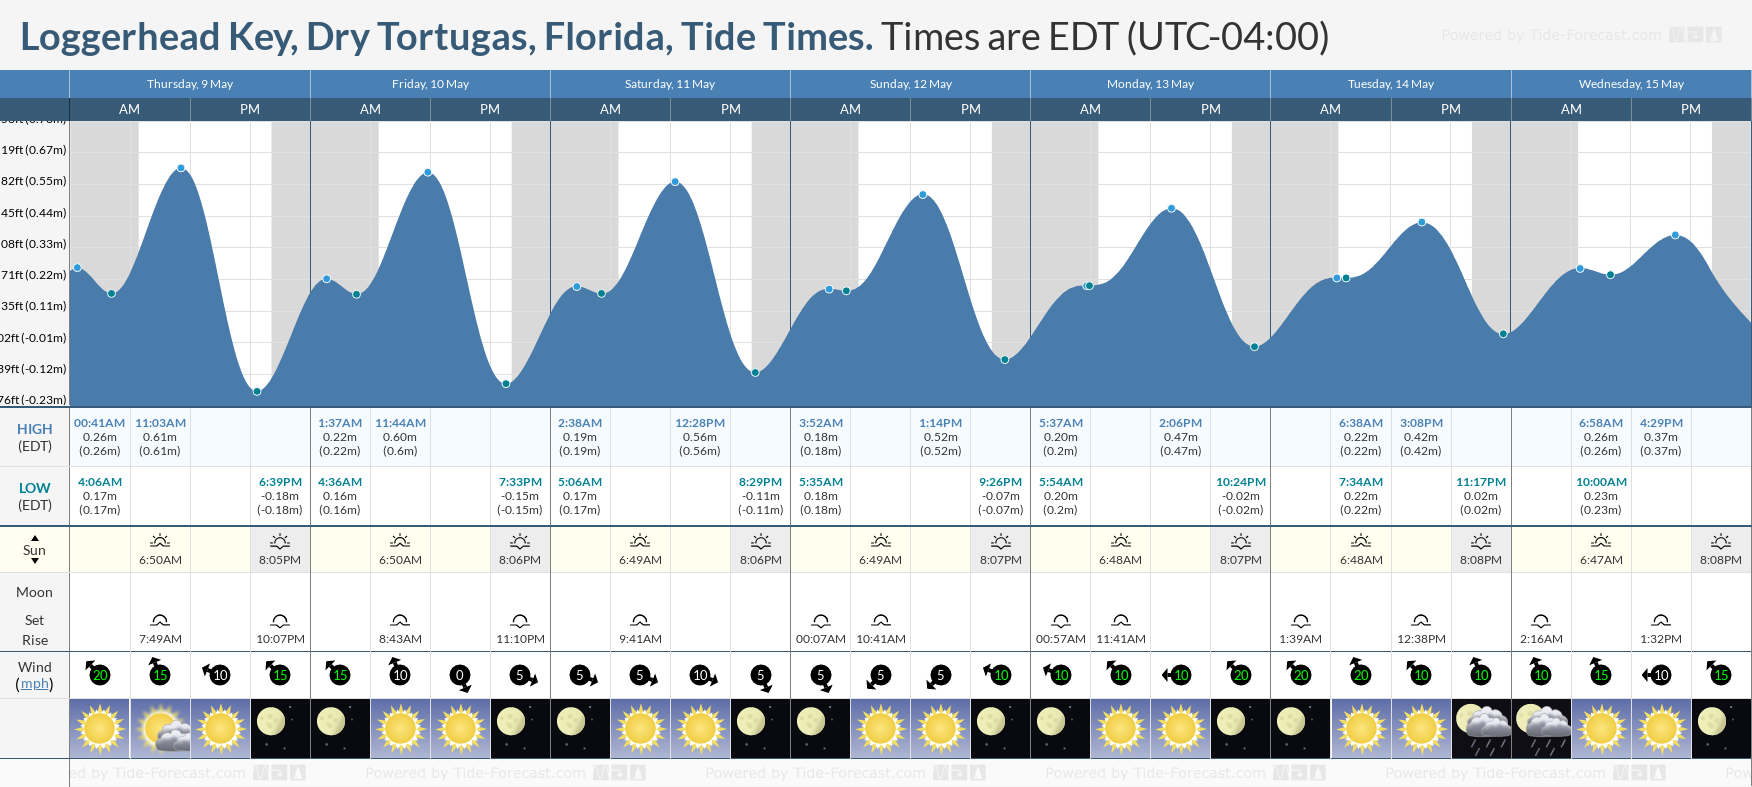 Loggerhead Key, Dry Tortugas, Florida Tide Chart including high and low tide tide times for the next 7 days